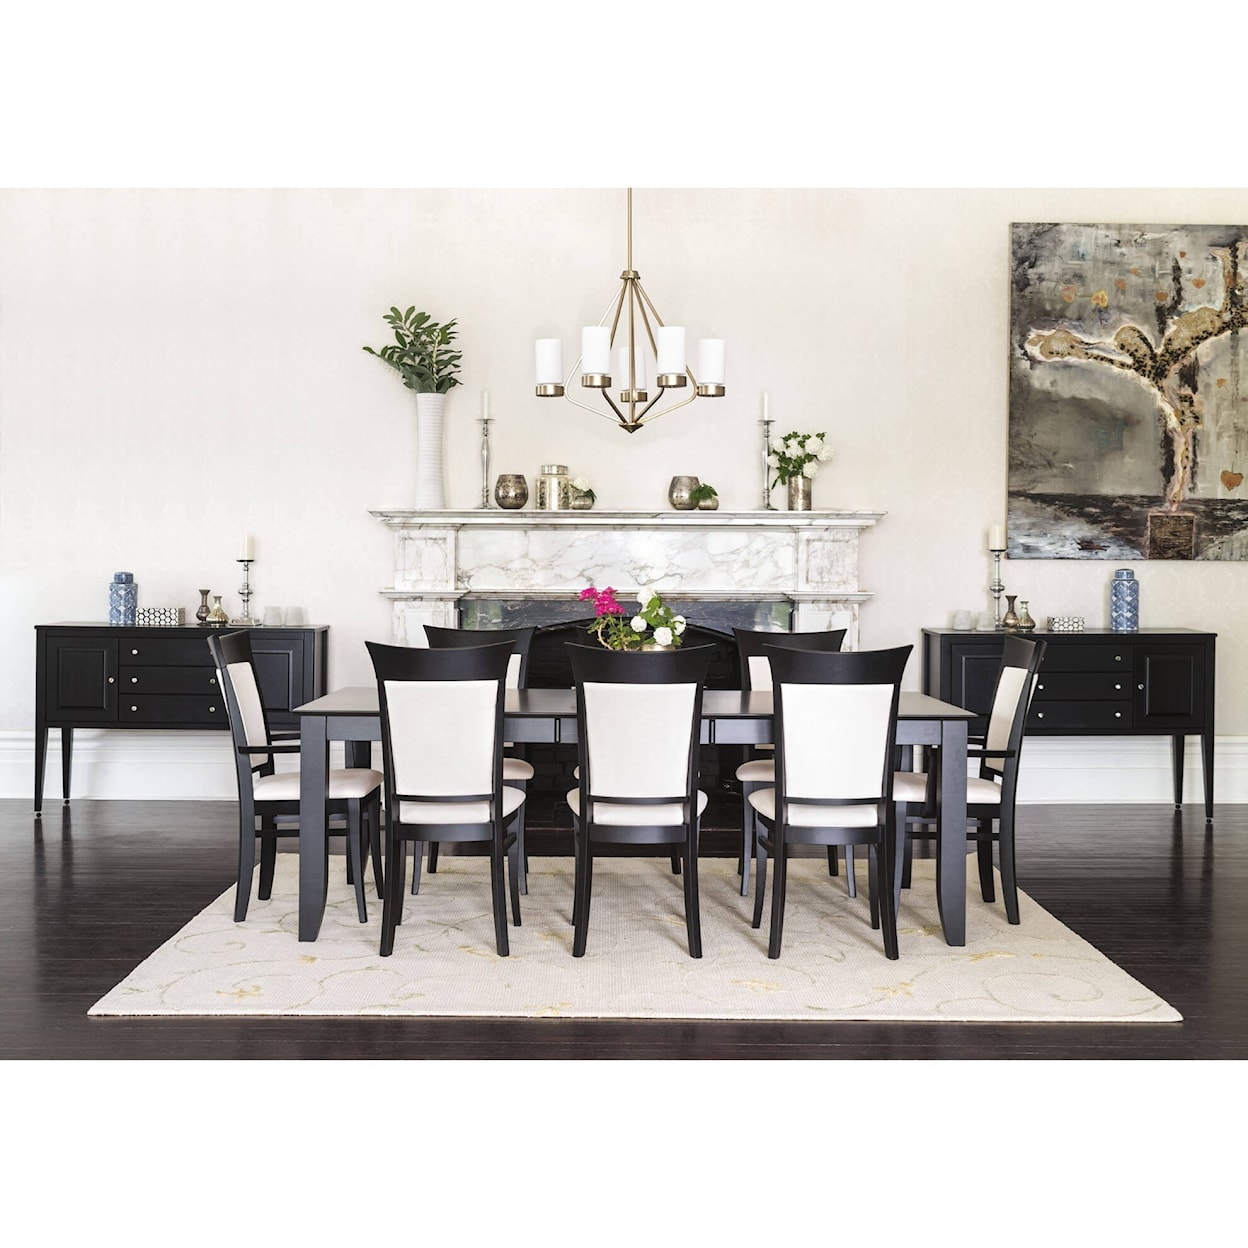 Canadel Classic 9-Piece Rect. Dining Table Set